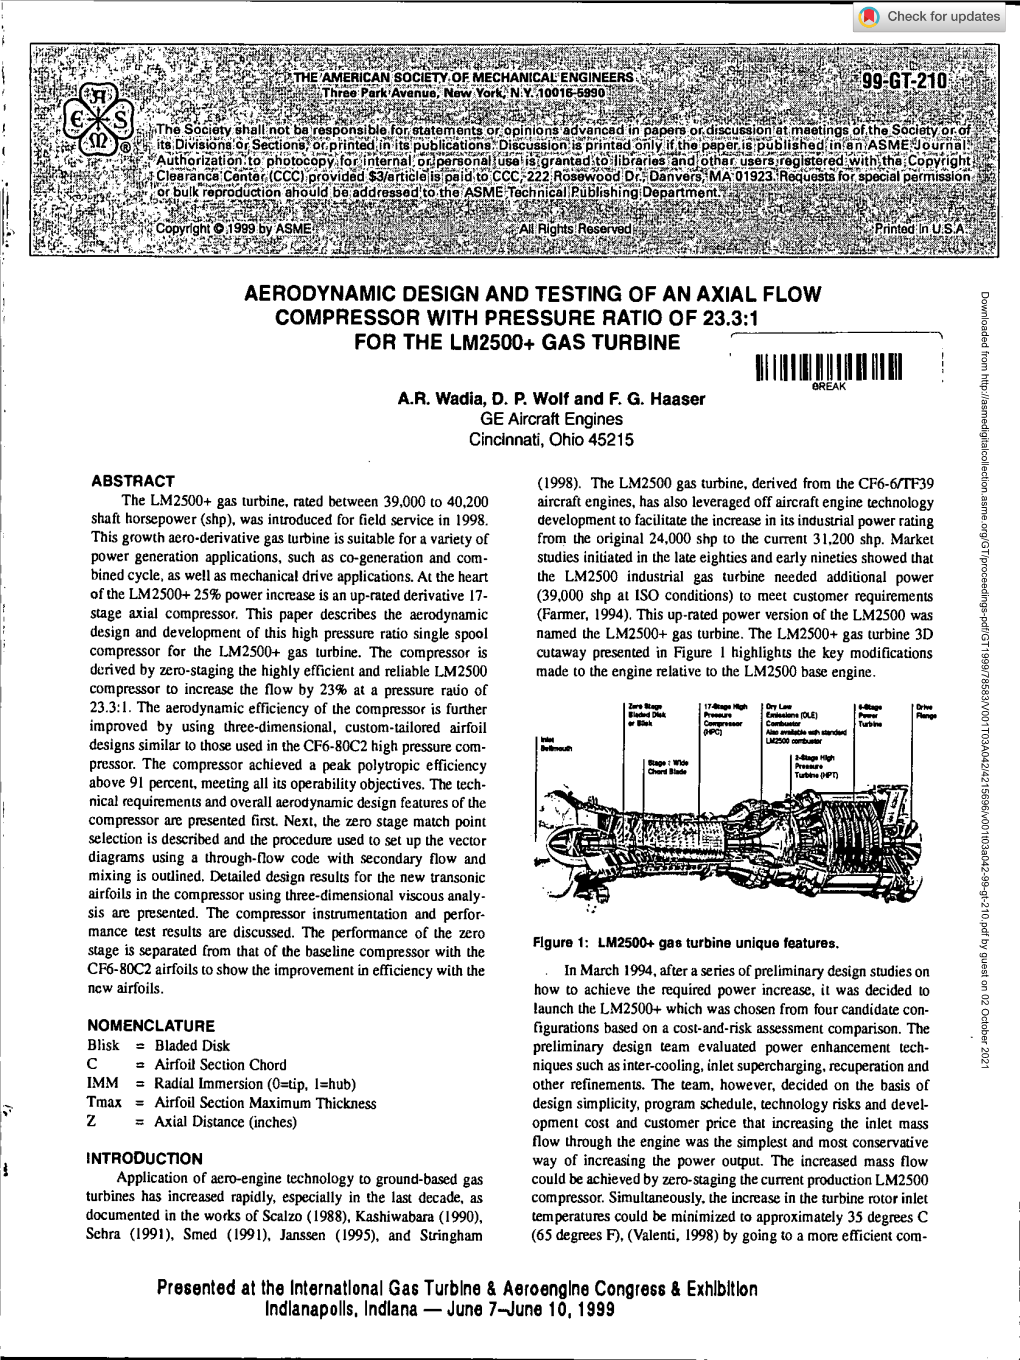 Aerodynamic Design Design and Testing of an Axial Flow